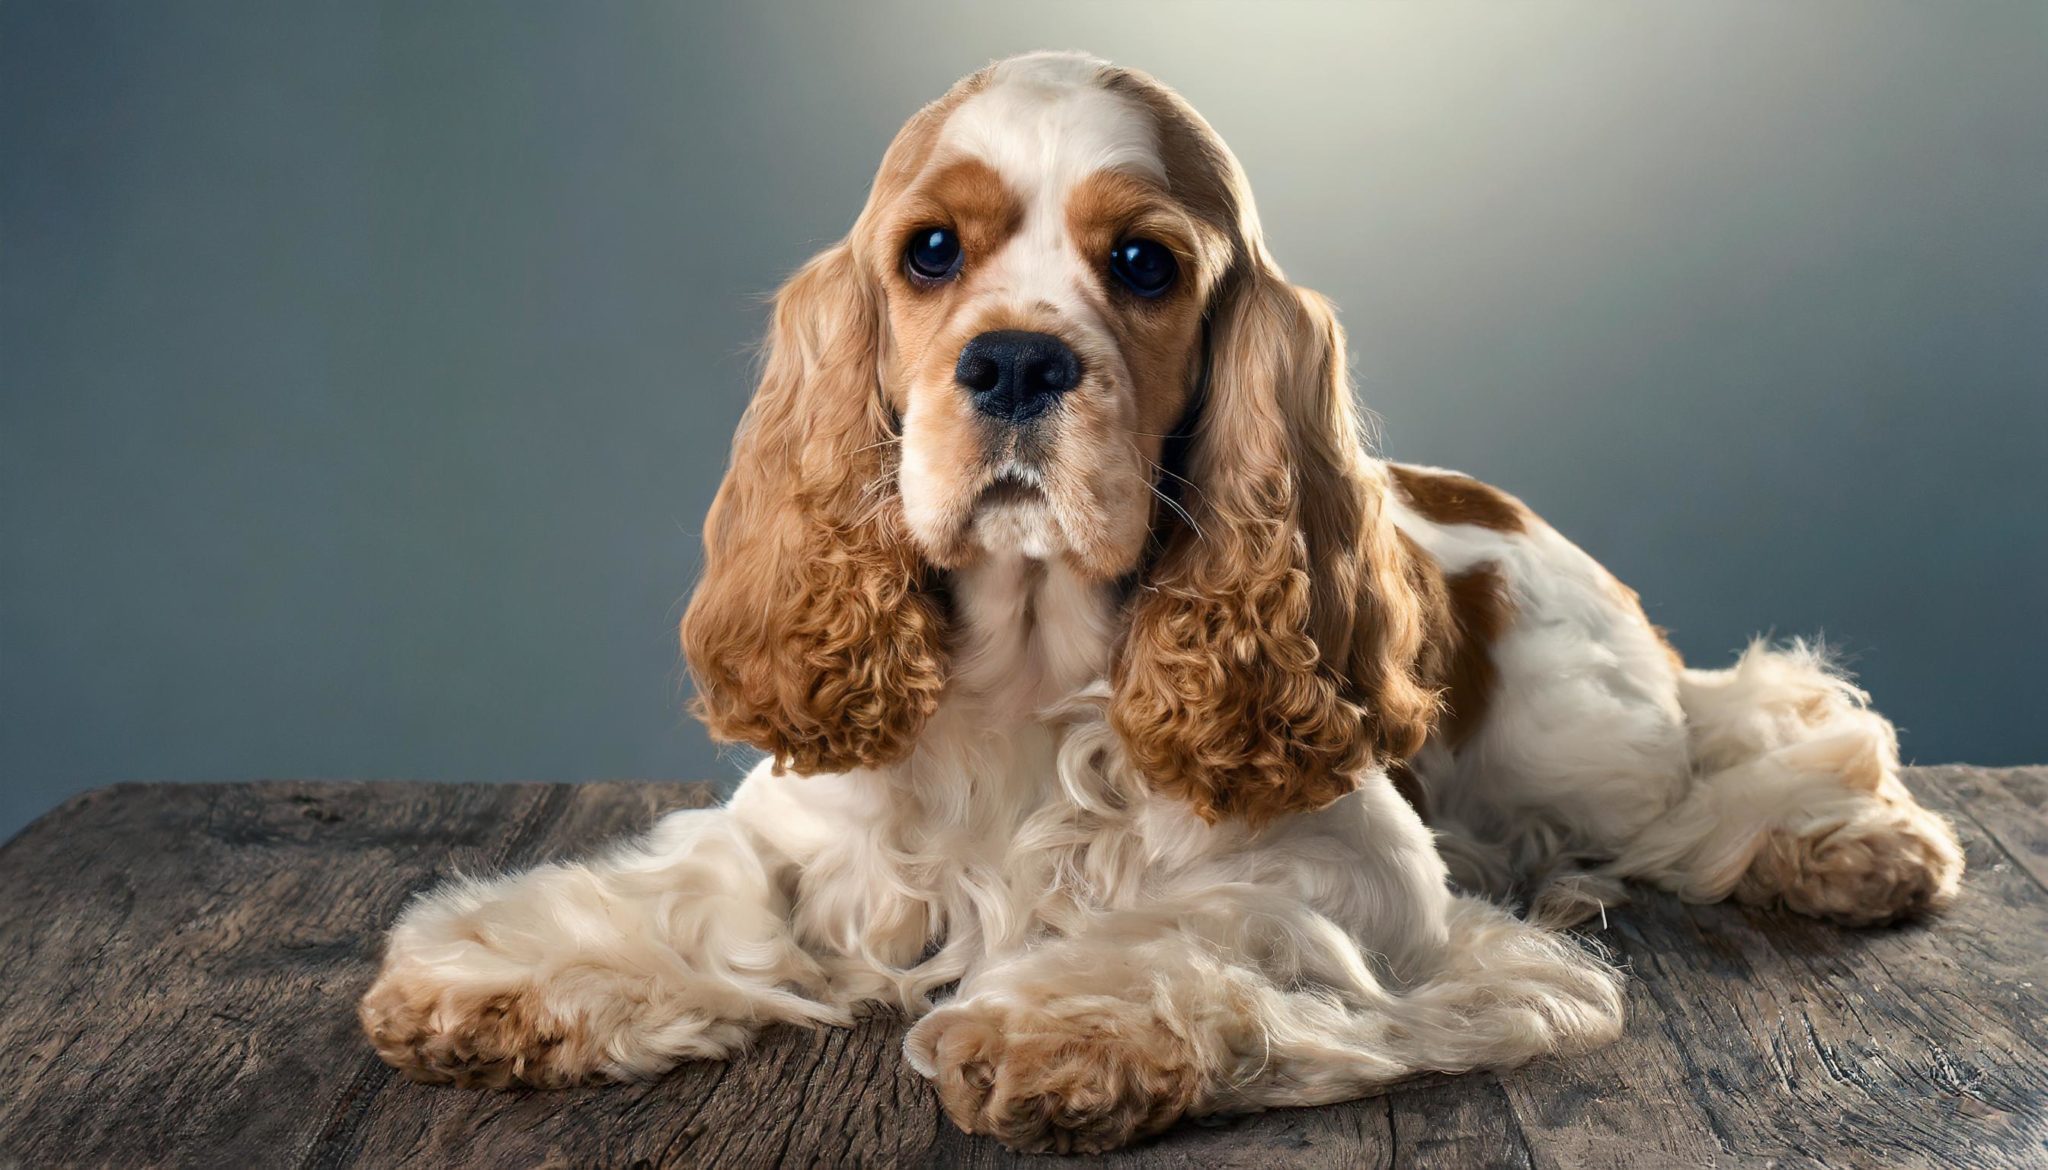 The American Cocker Spaniel is a good-natured and friendly dog with a happy personality. They are also intelligent and easy to train and will be extremely obedient when trained properly.